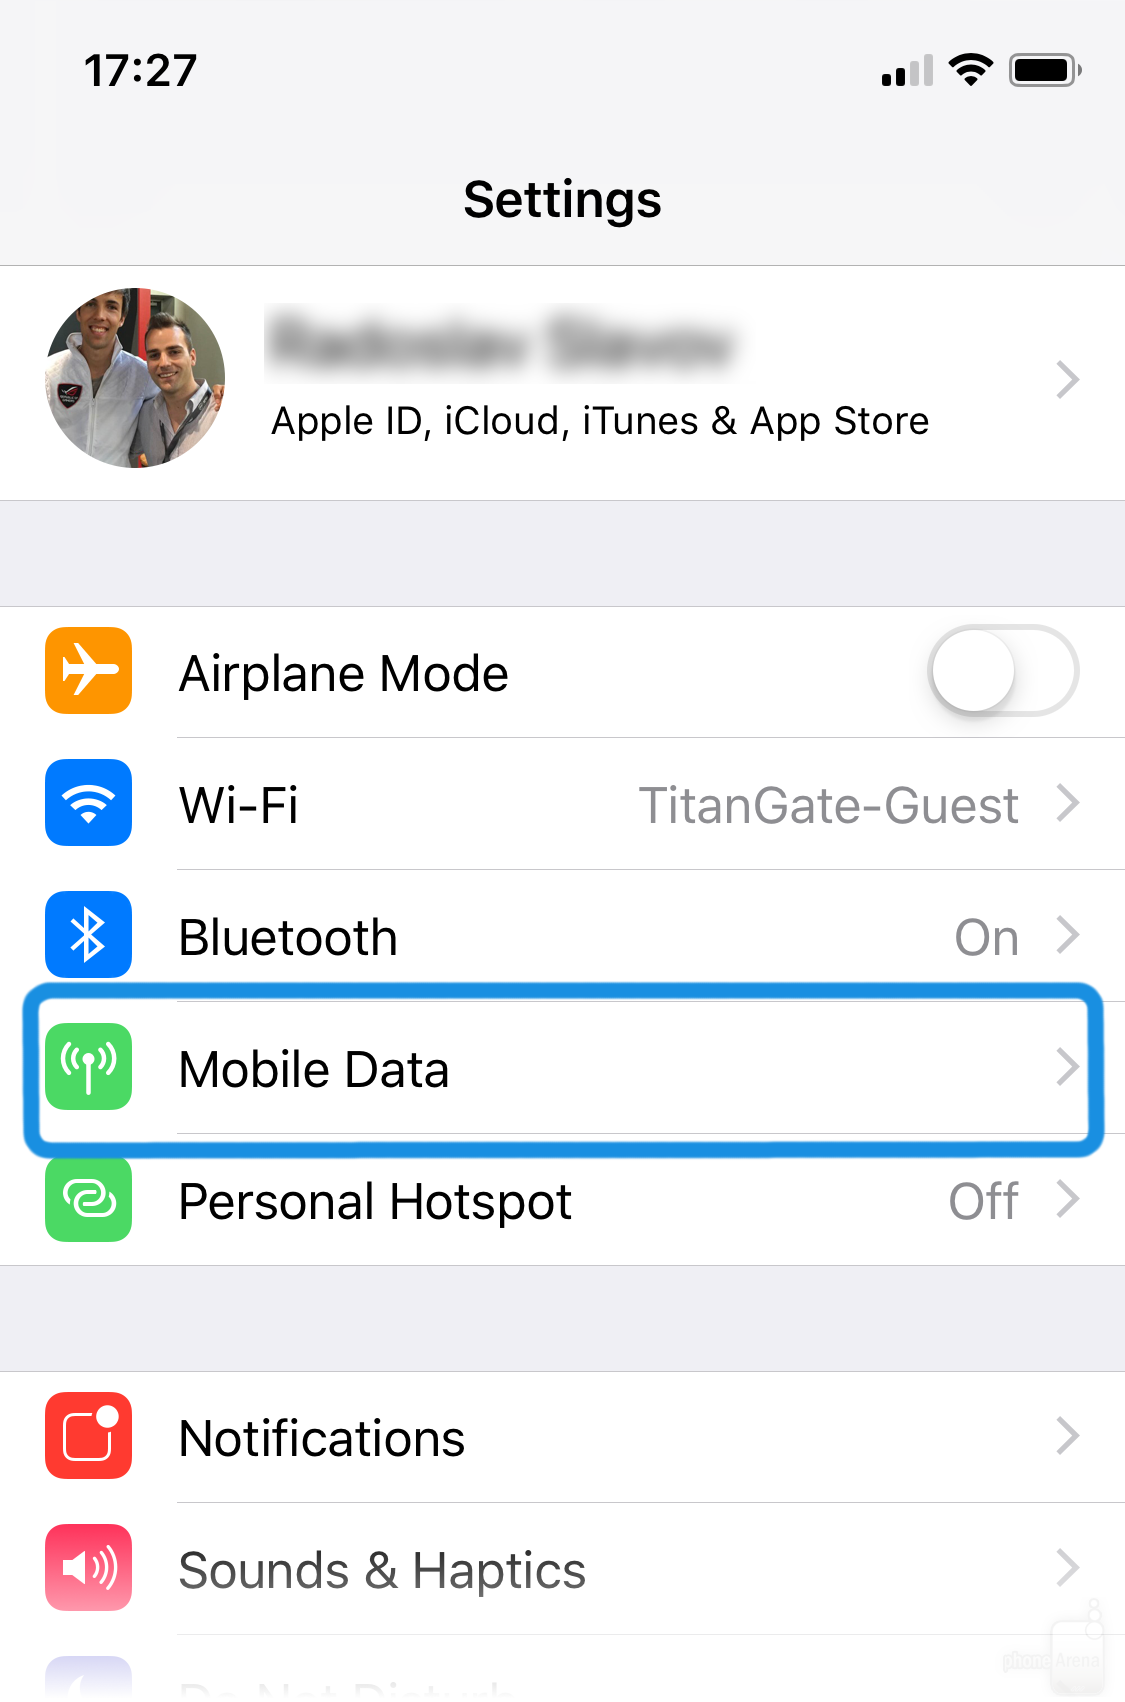 How to access the SIM card applications and services on iPhone